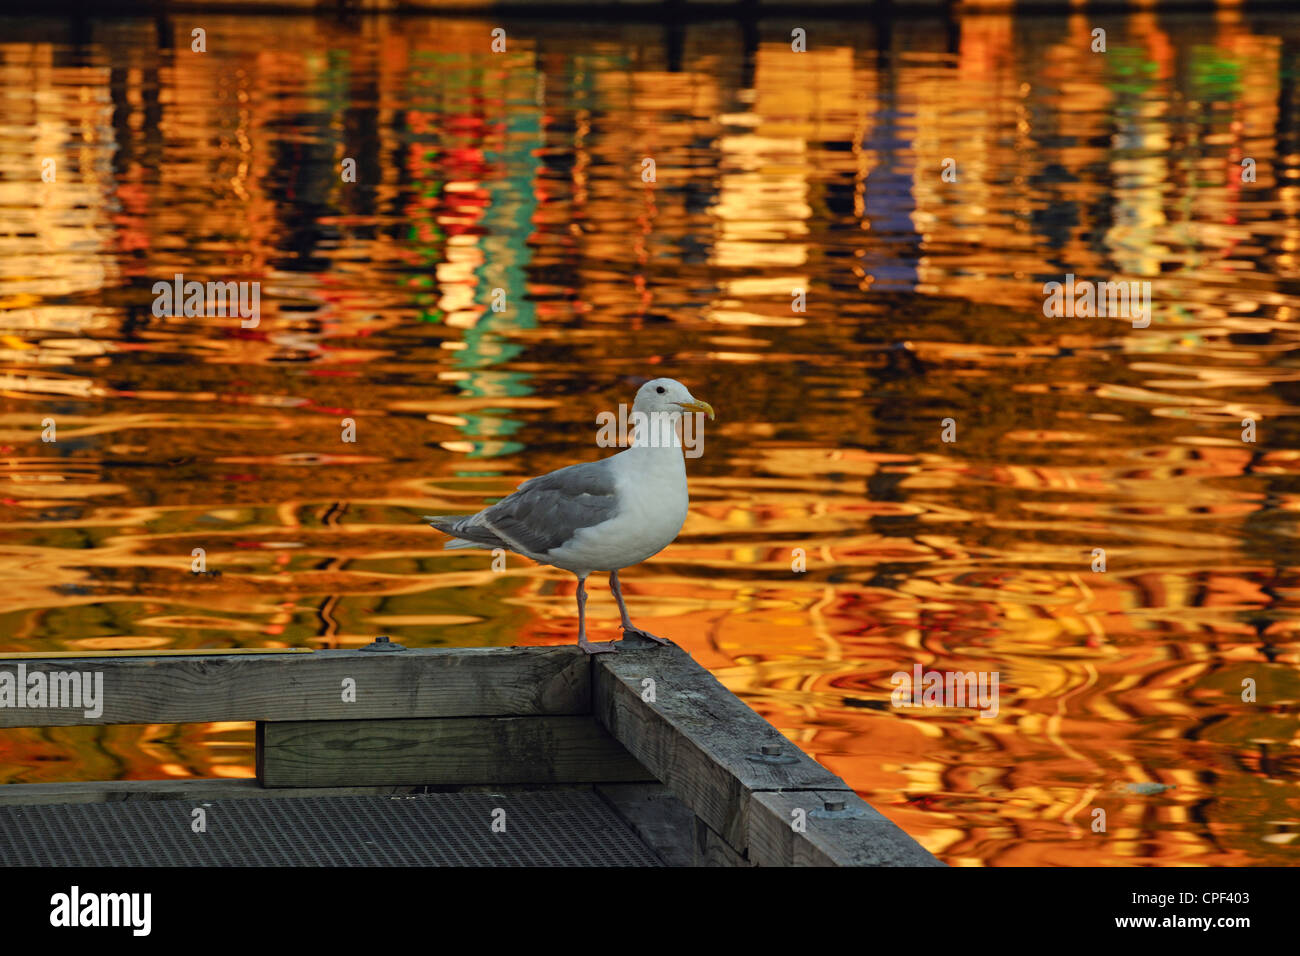 Pacific gull perched on harbour railing with reflections in Victoria Inner Harbour, Victoria, BC, Canada Stock Photo